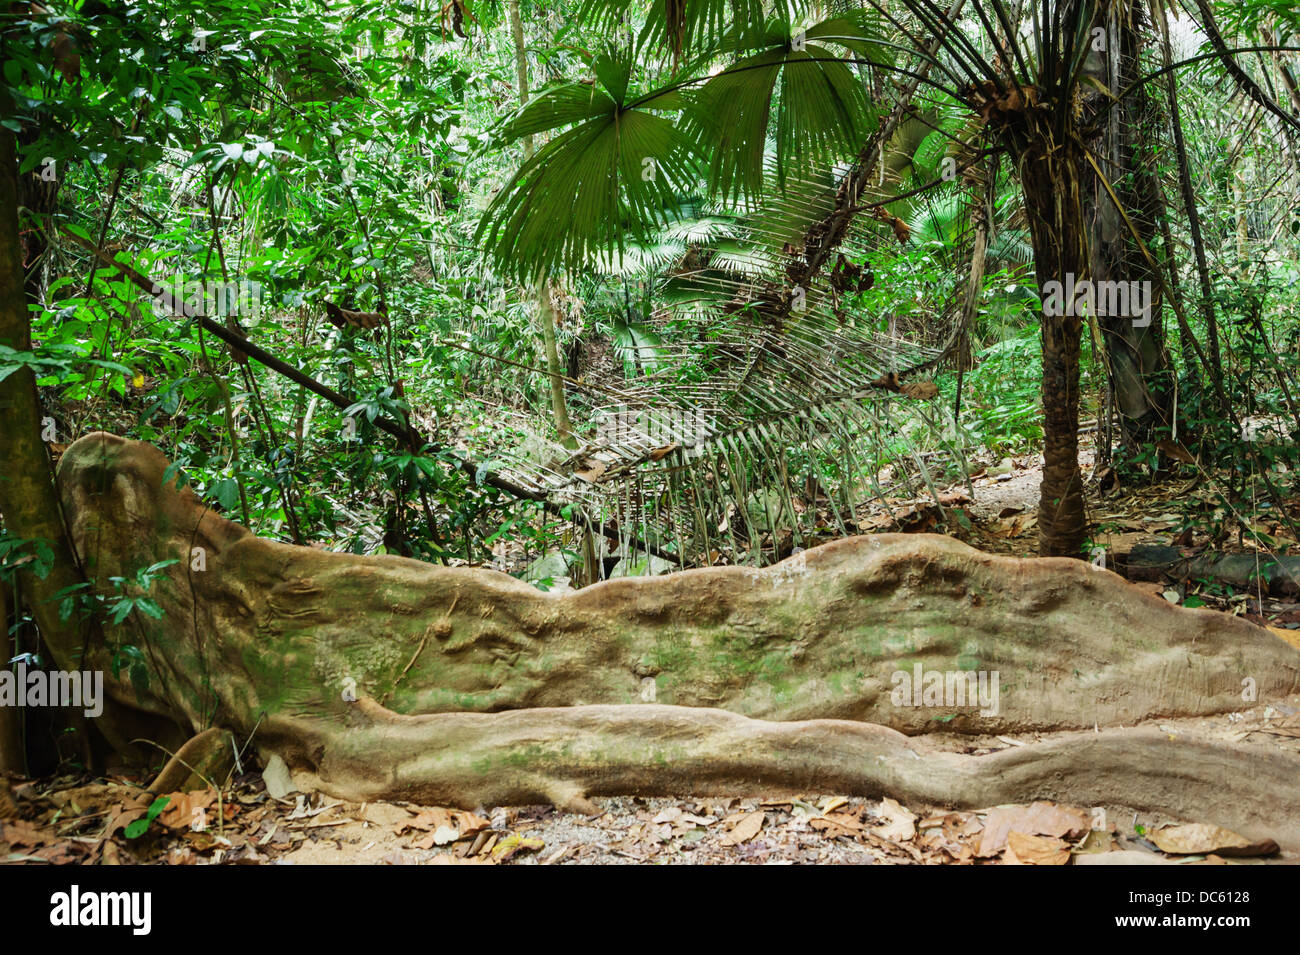 tropical jungles of South East Asia Stock Photo